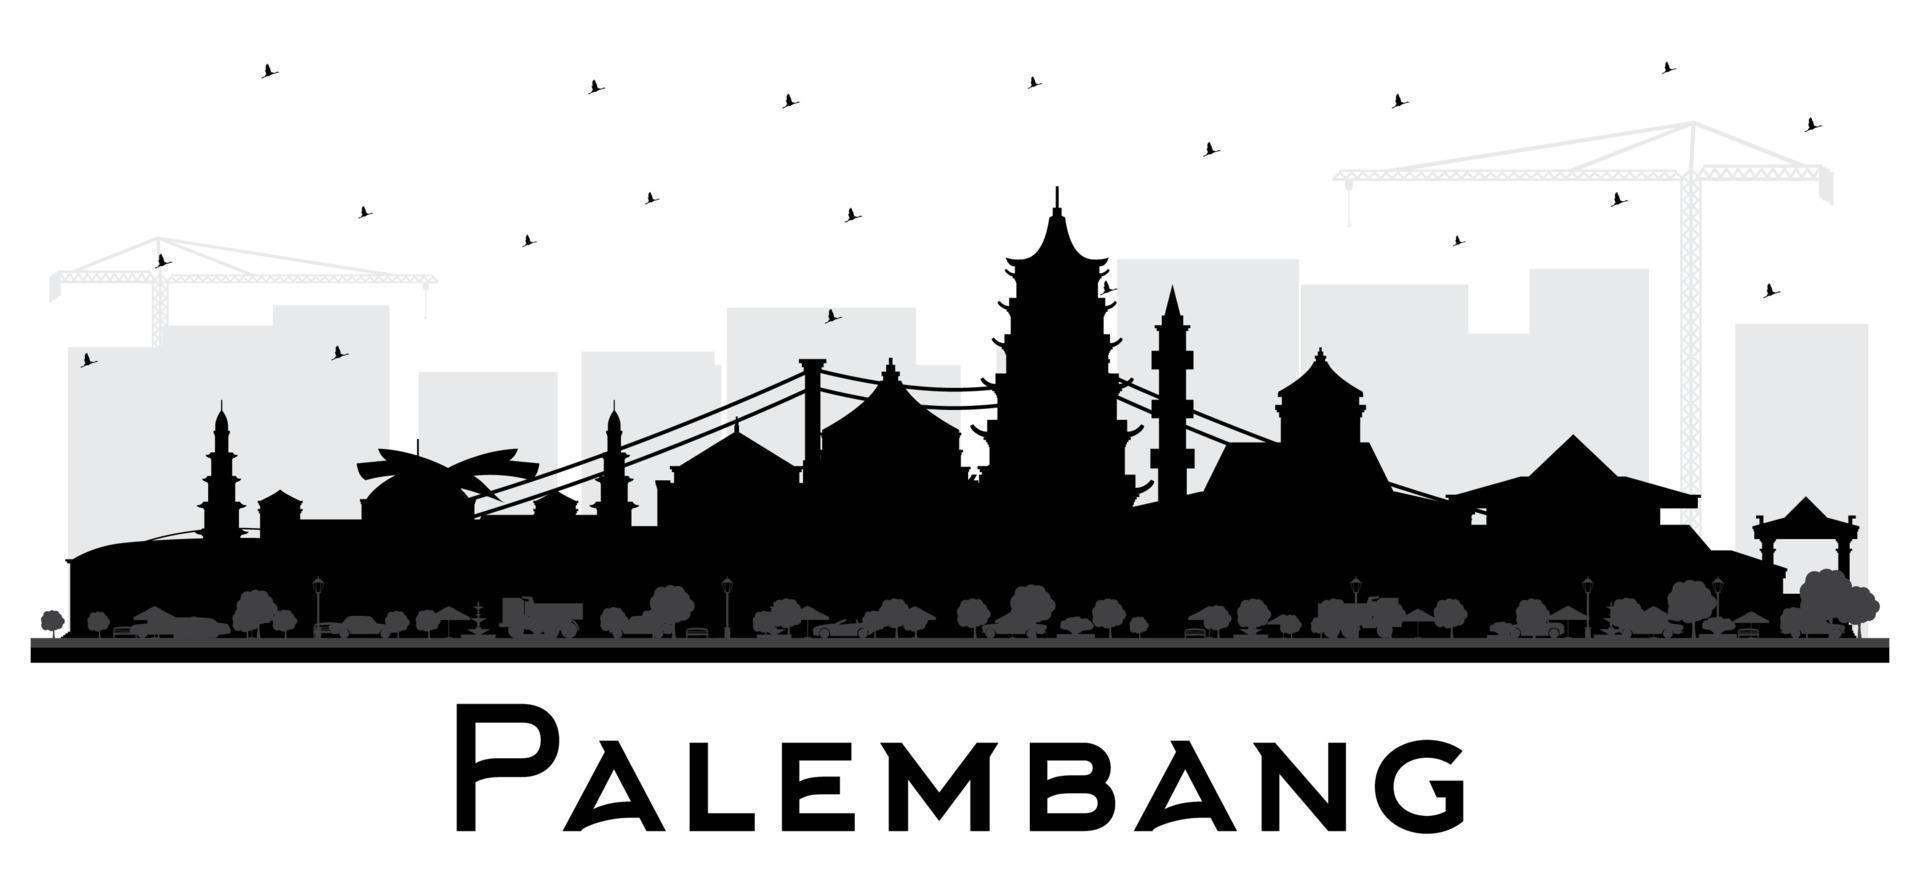 Palembang Indonesia City Skyline Silhouette with Black Buildings Isolated on White. vector